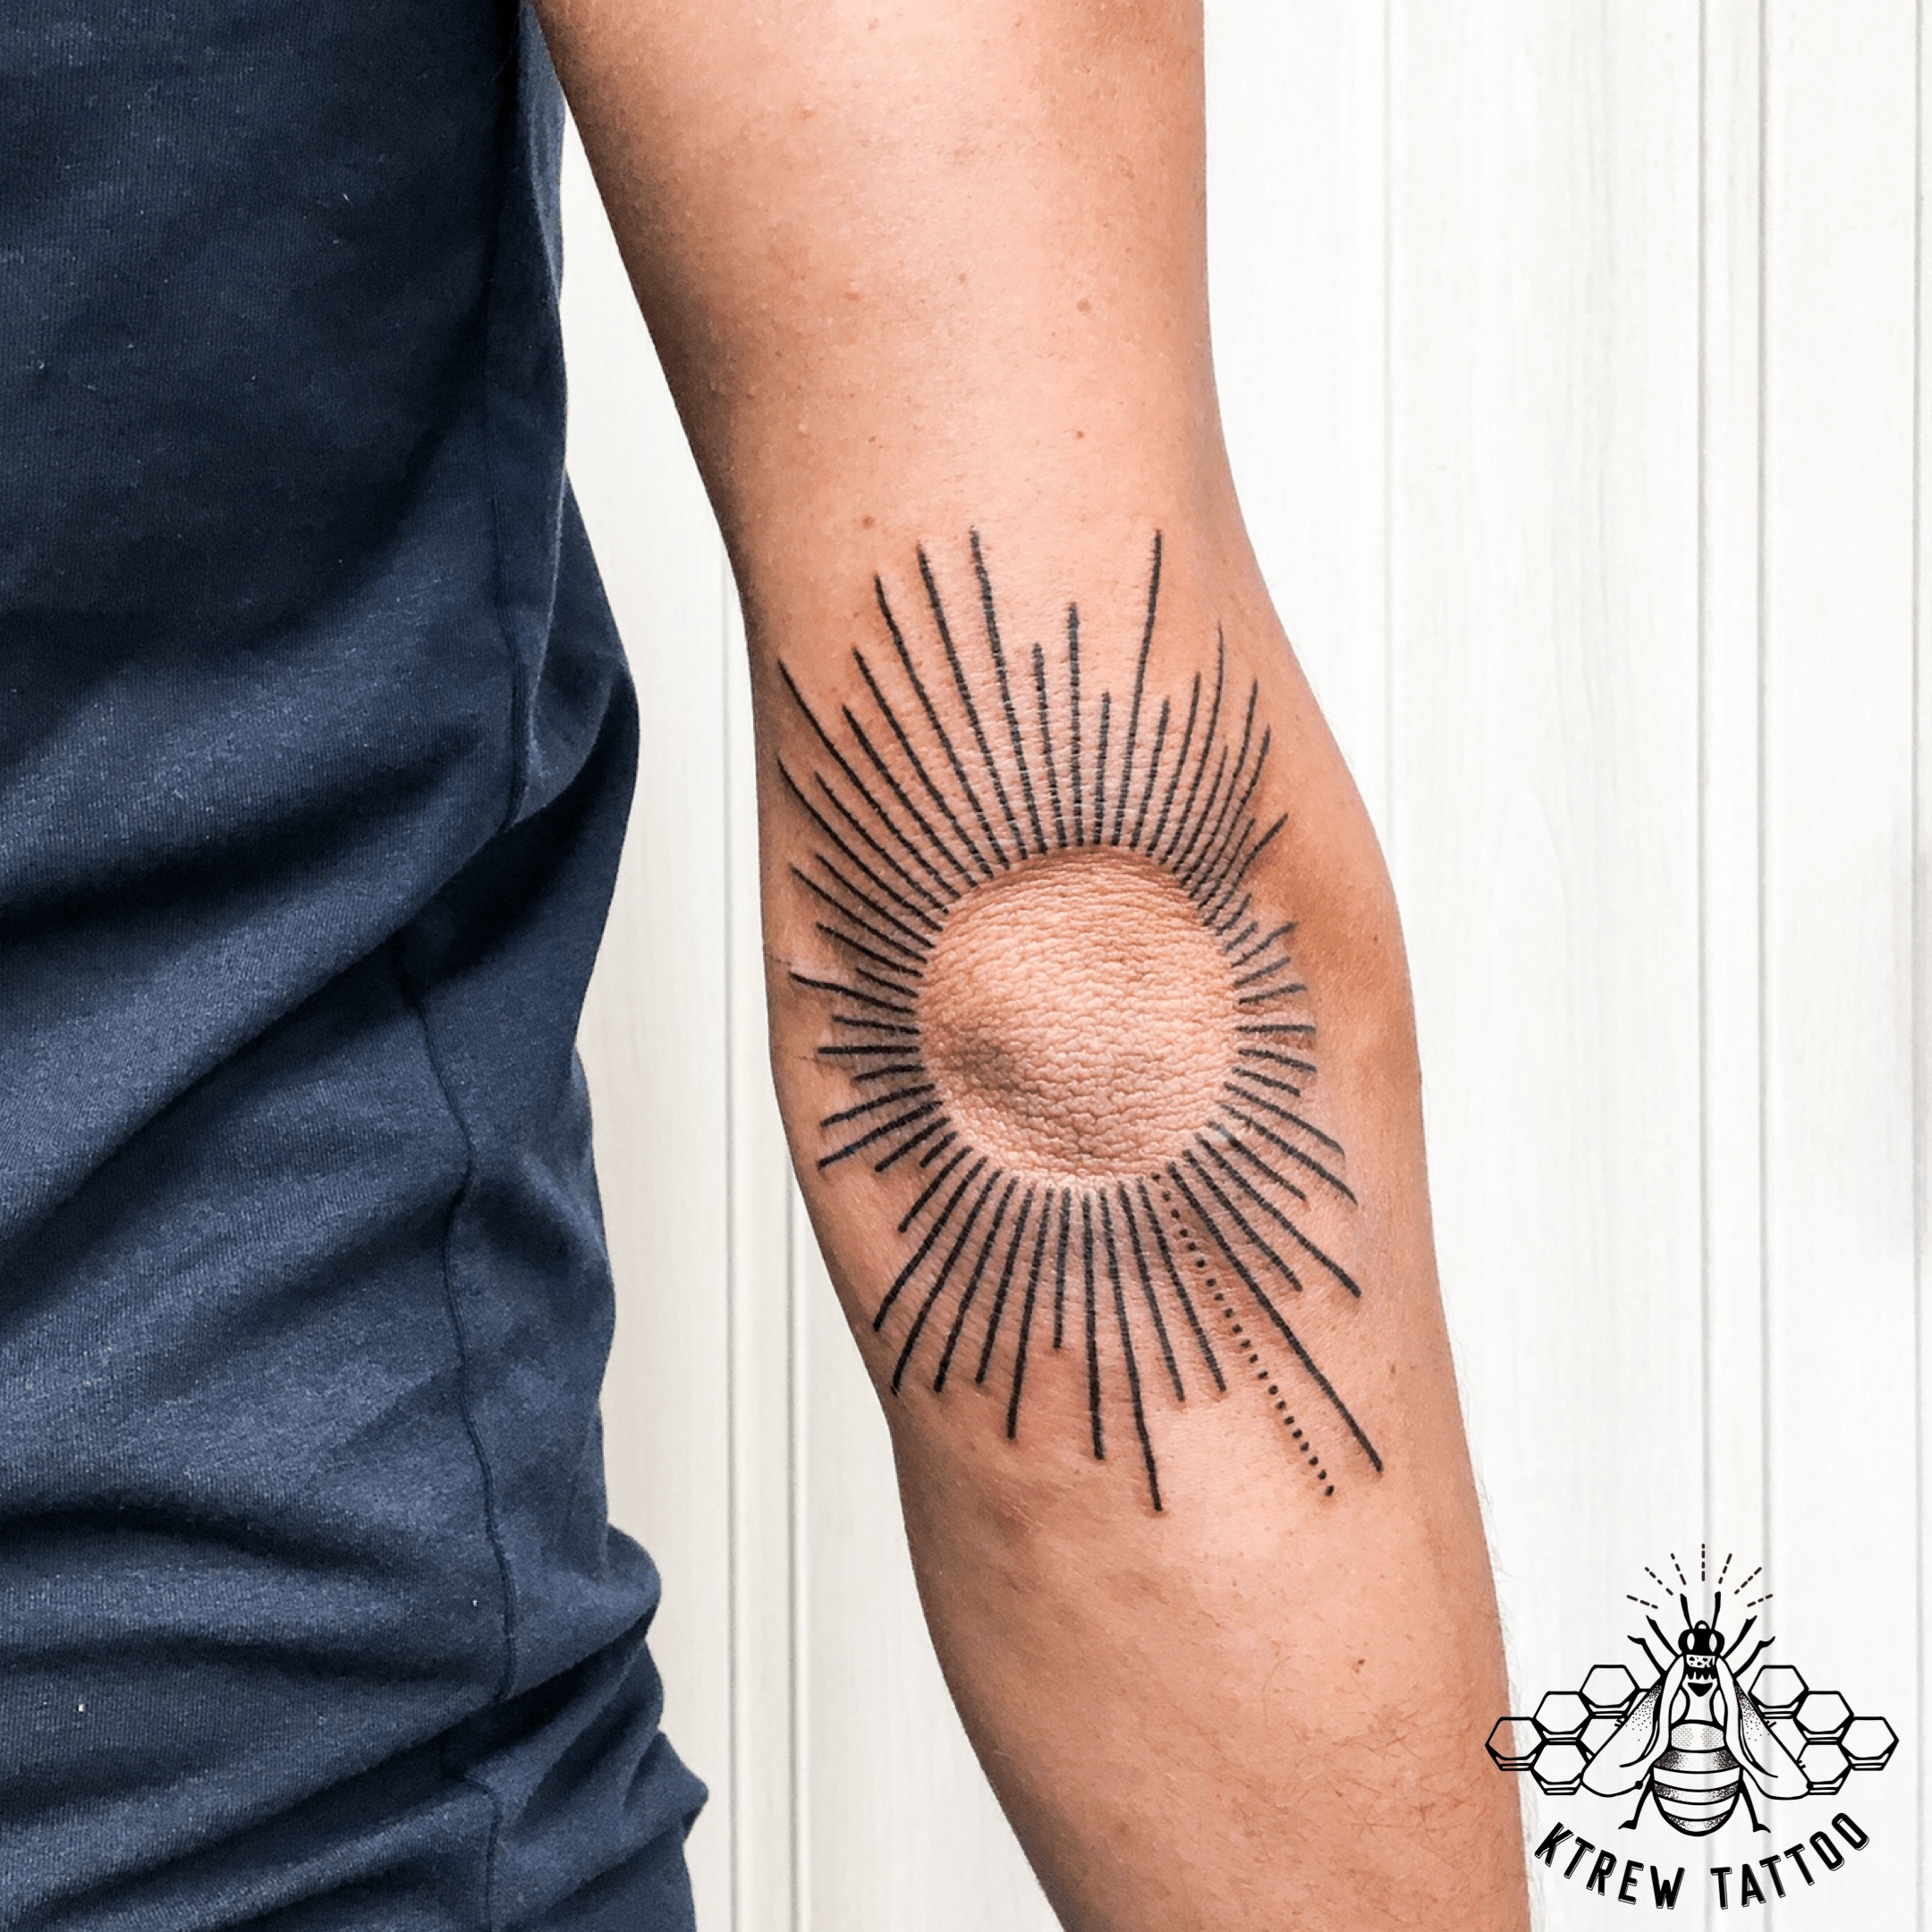 Discover more than 86 tattoos of sun rays best  thtantai2